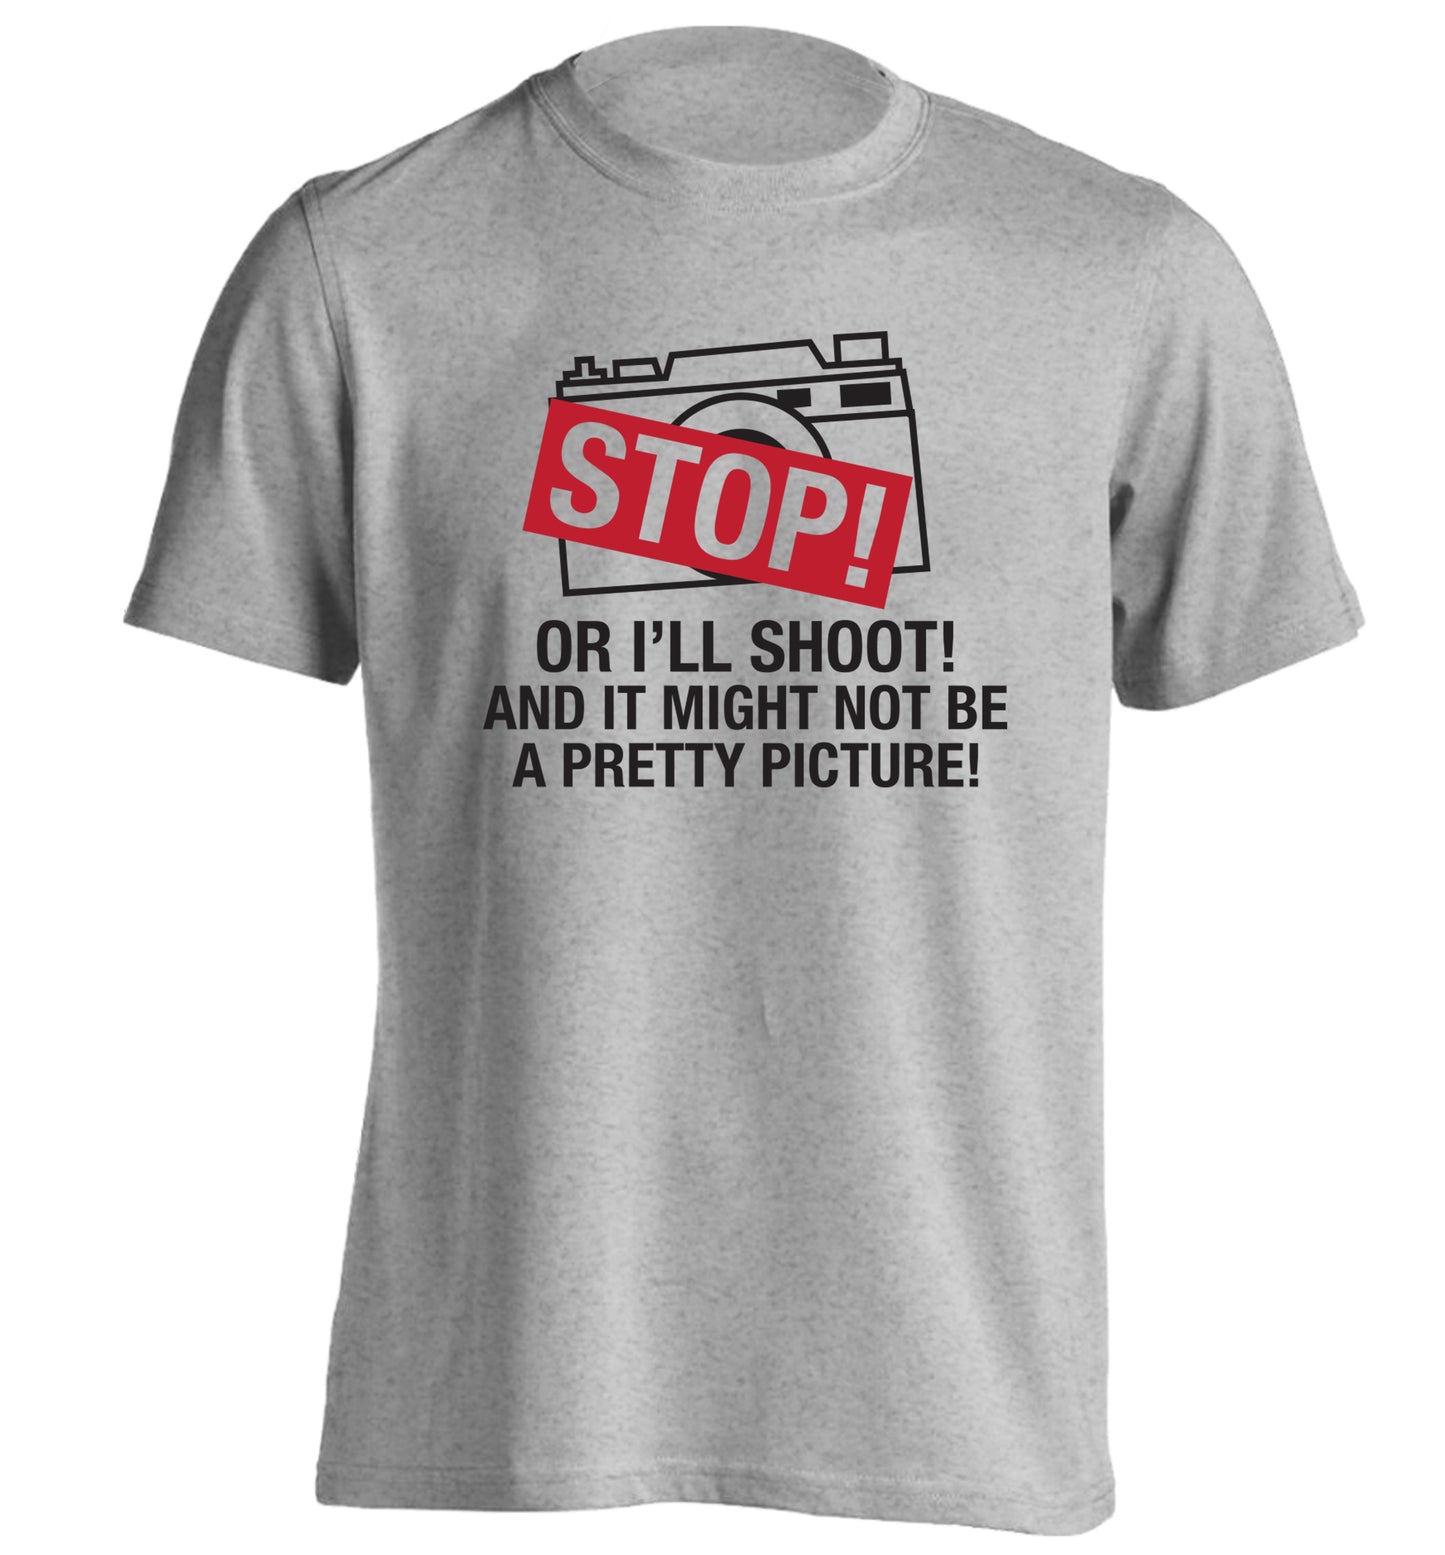 Stop or I'll shoot and it won't be a pretty picture adults unisex grey Tshirt 2XL